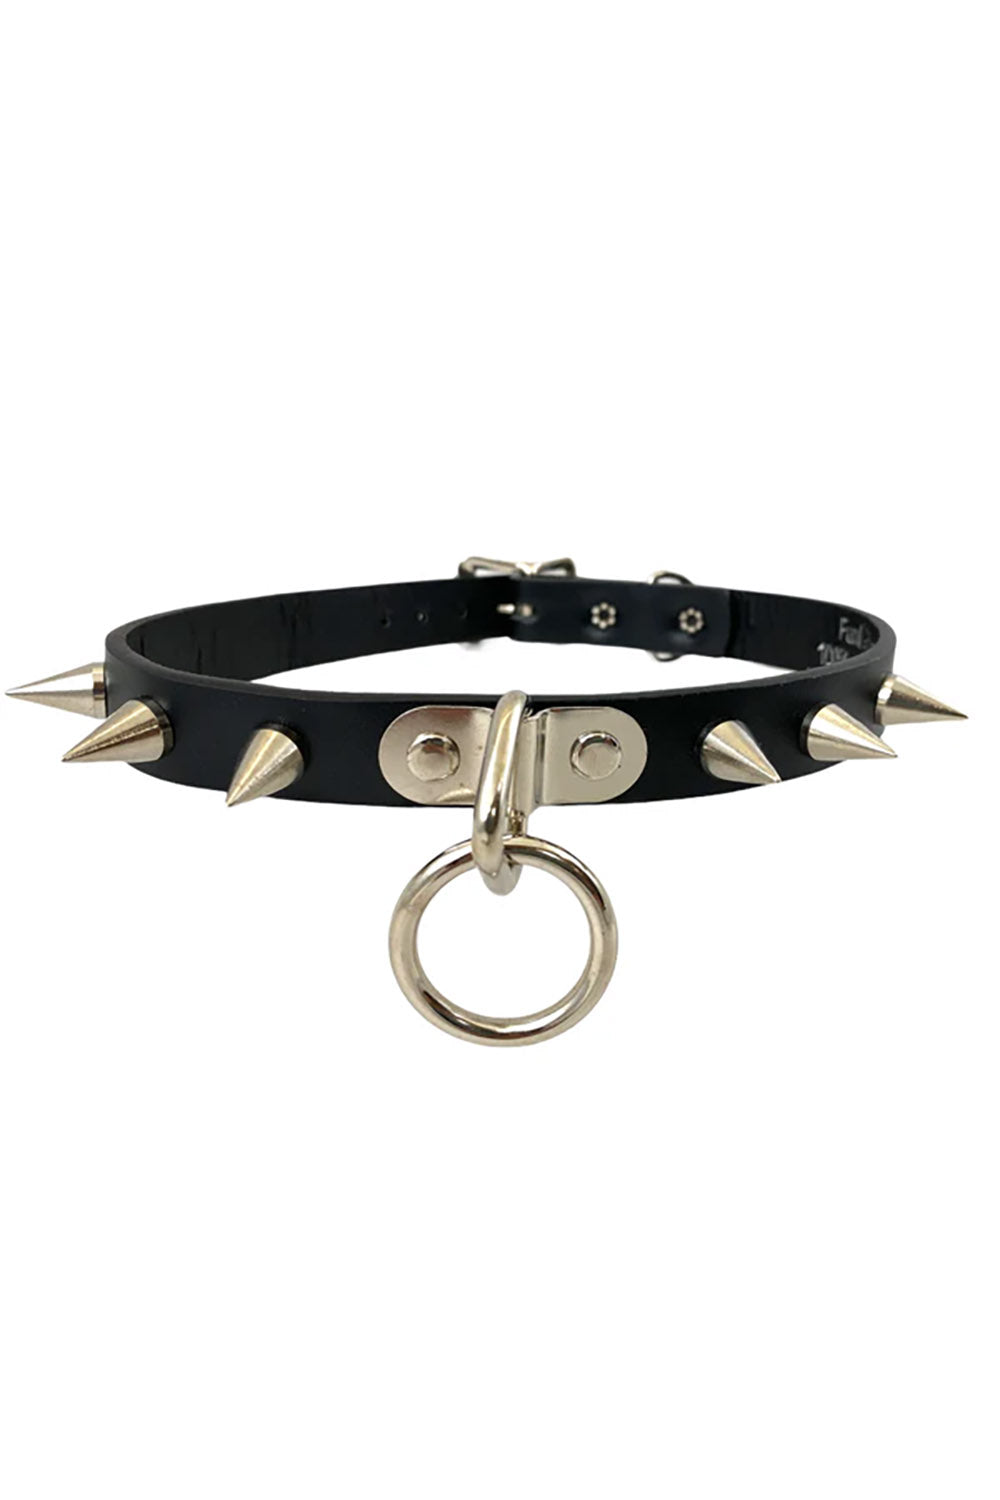 spiked choker made of vegan leather